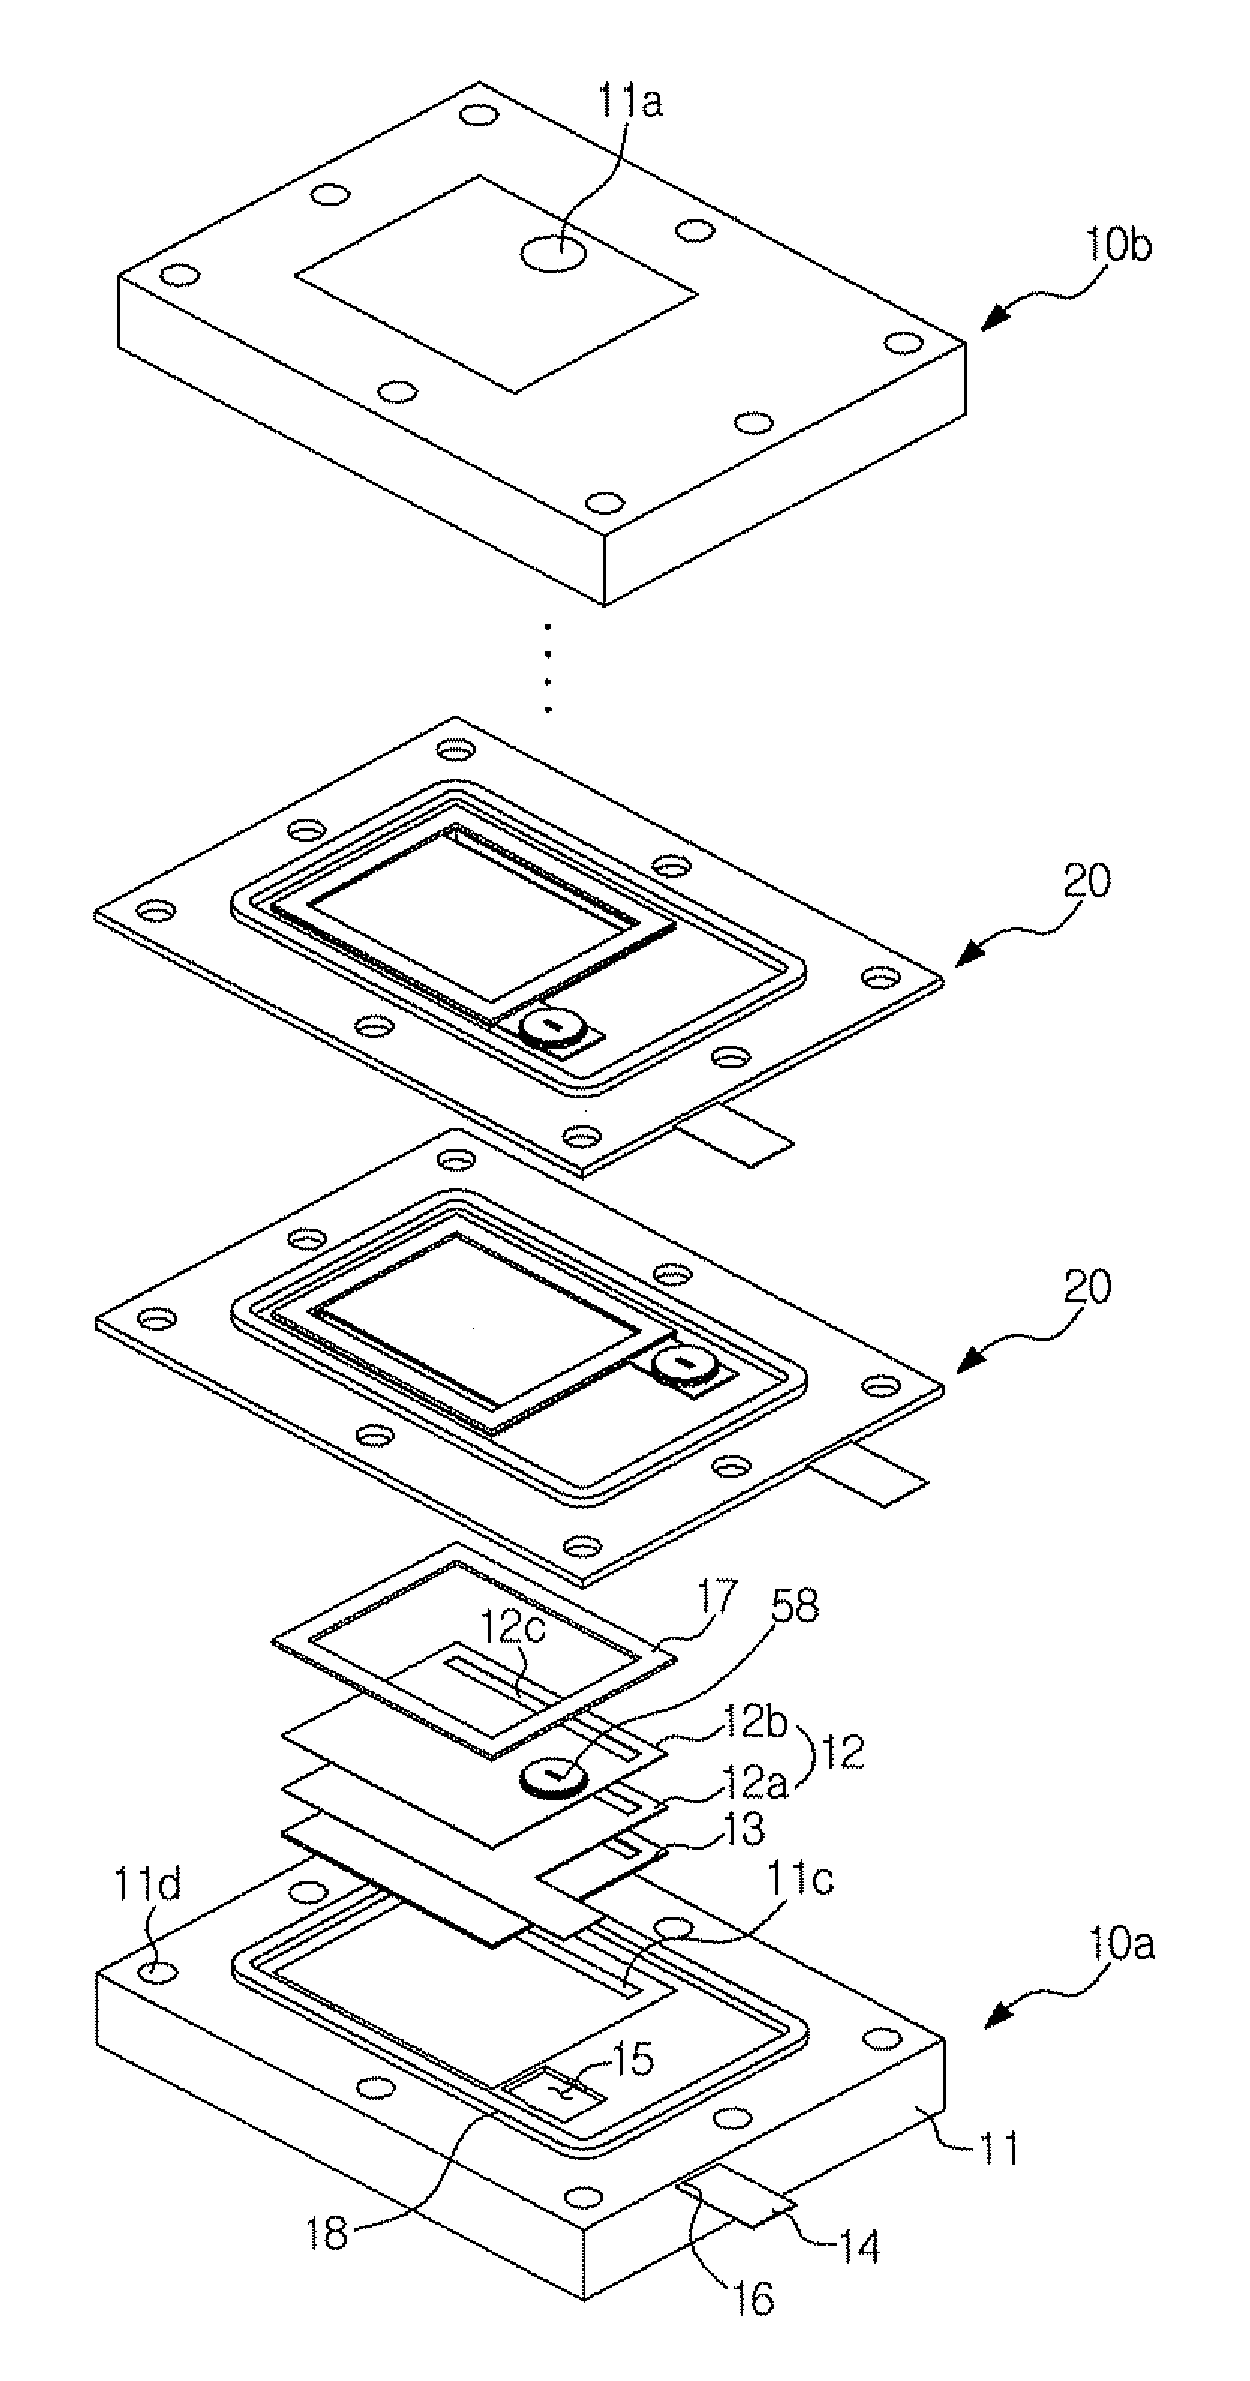 Deionization apparatus and method of manufacturing the same